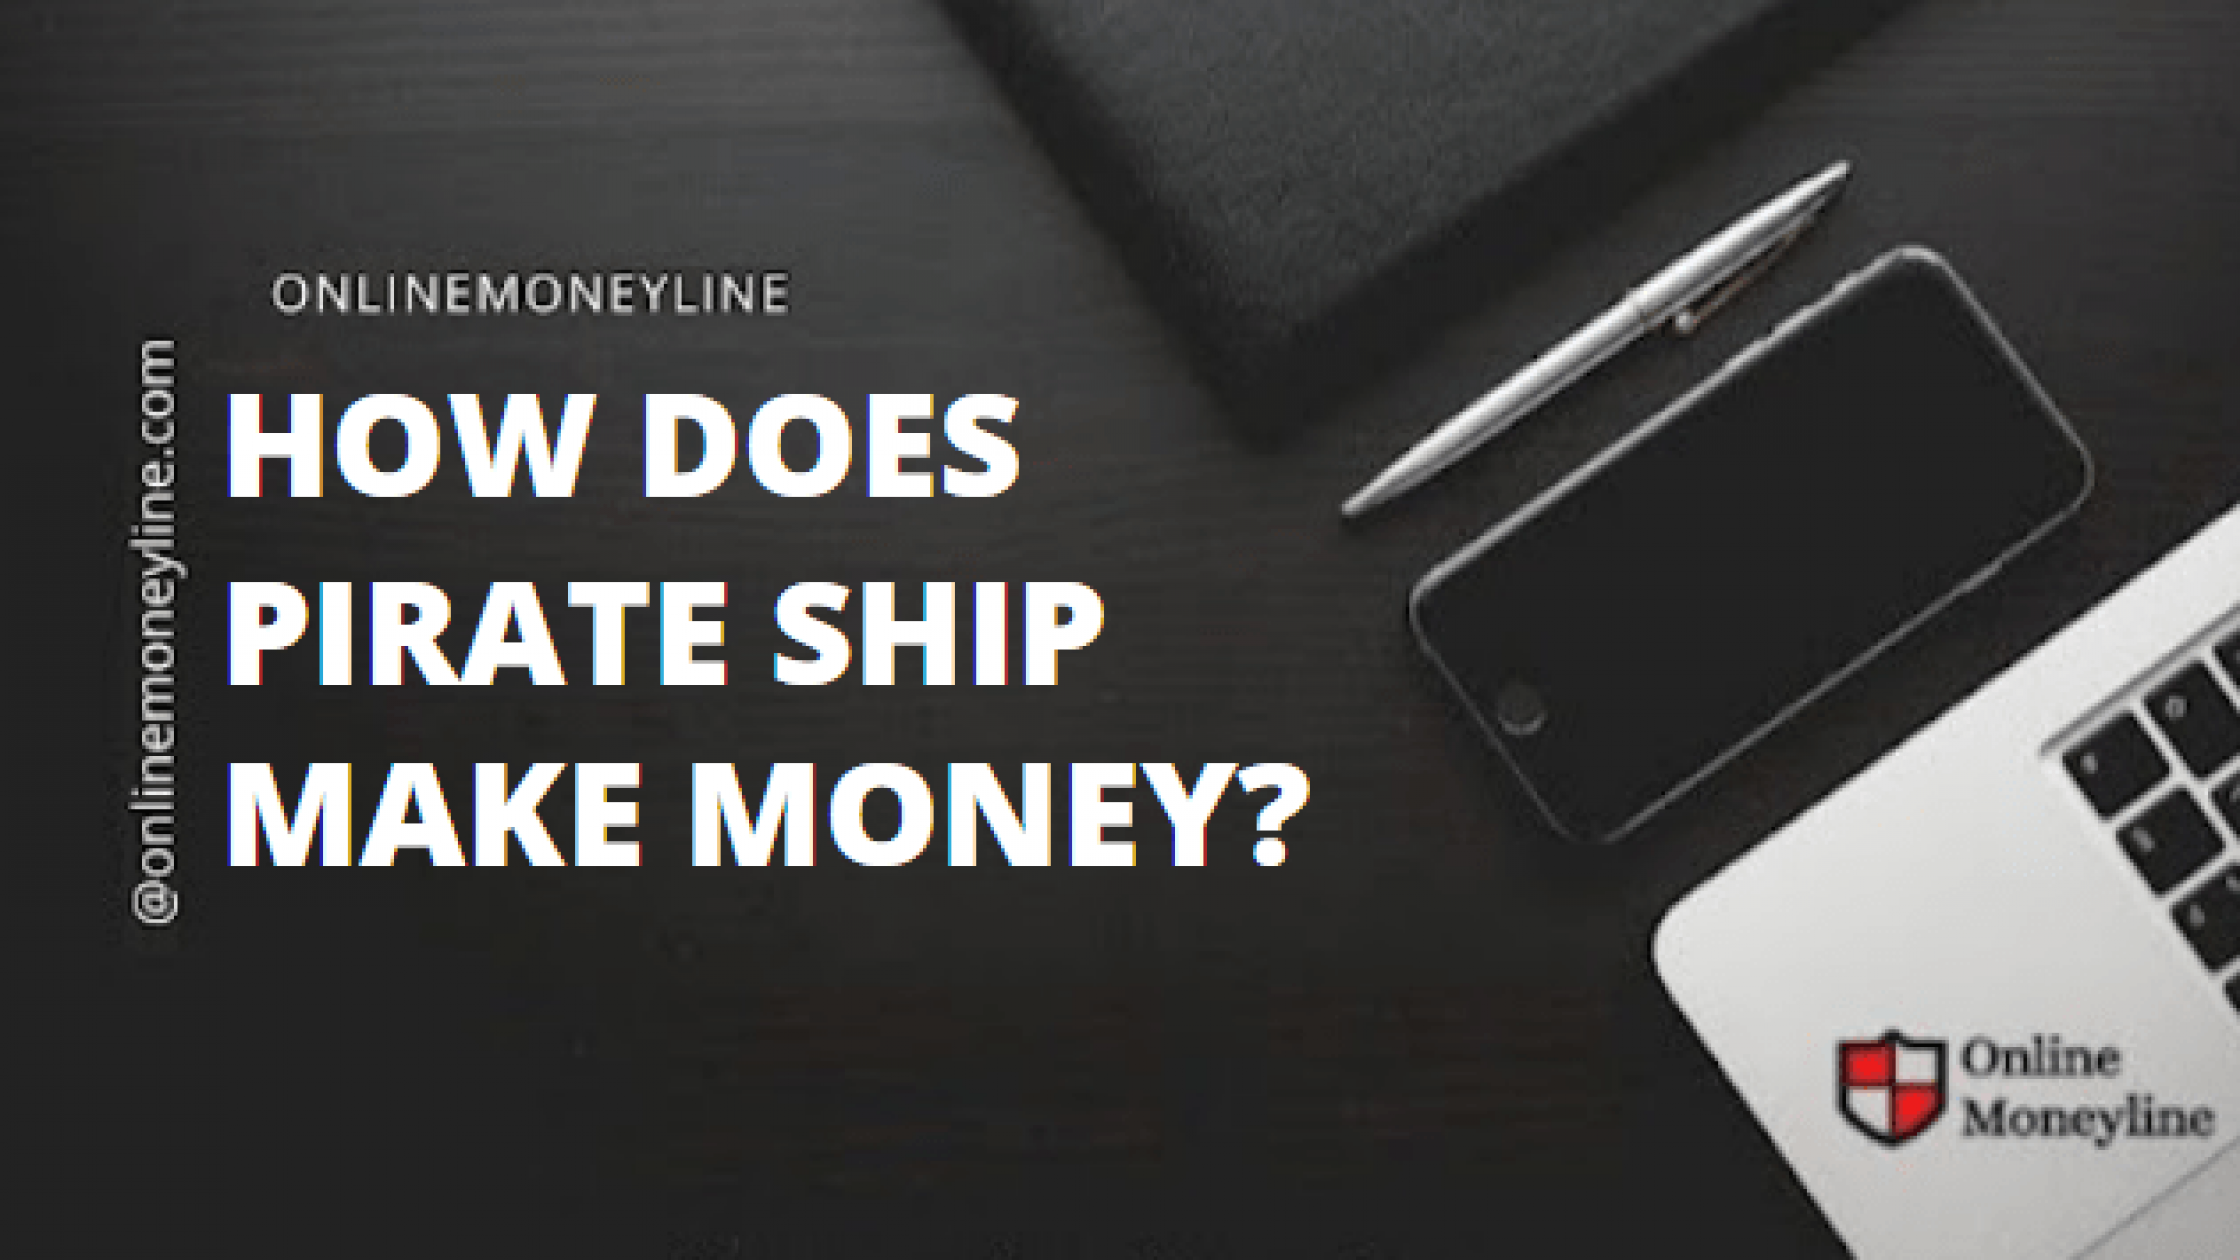 How Does Pirate Ship Make Money?